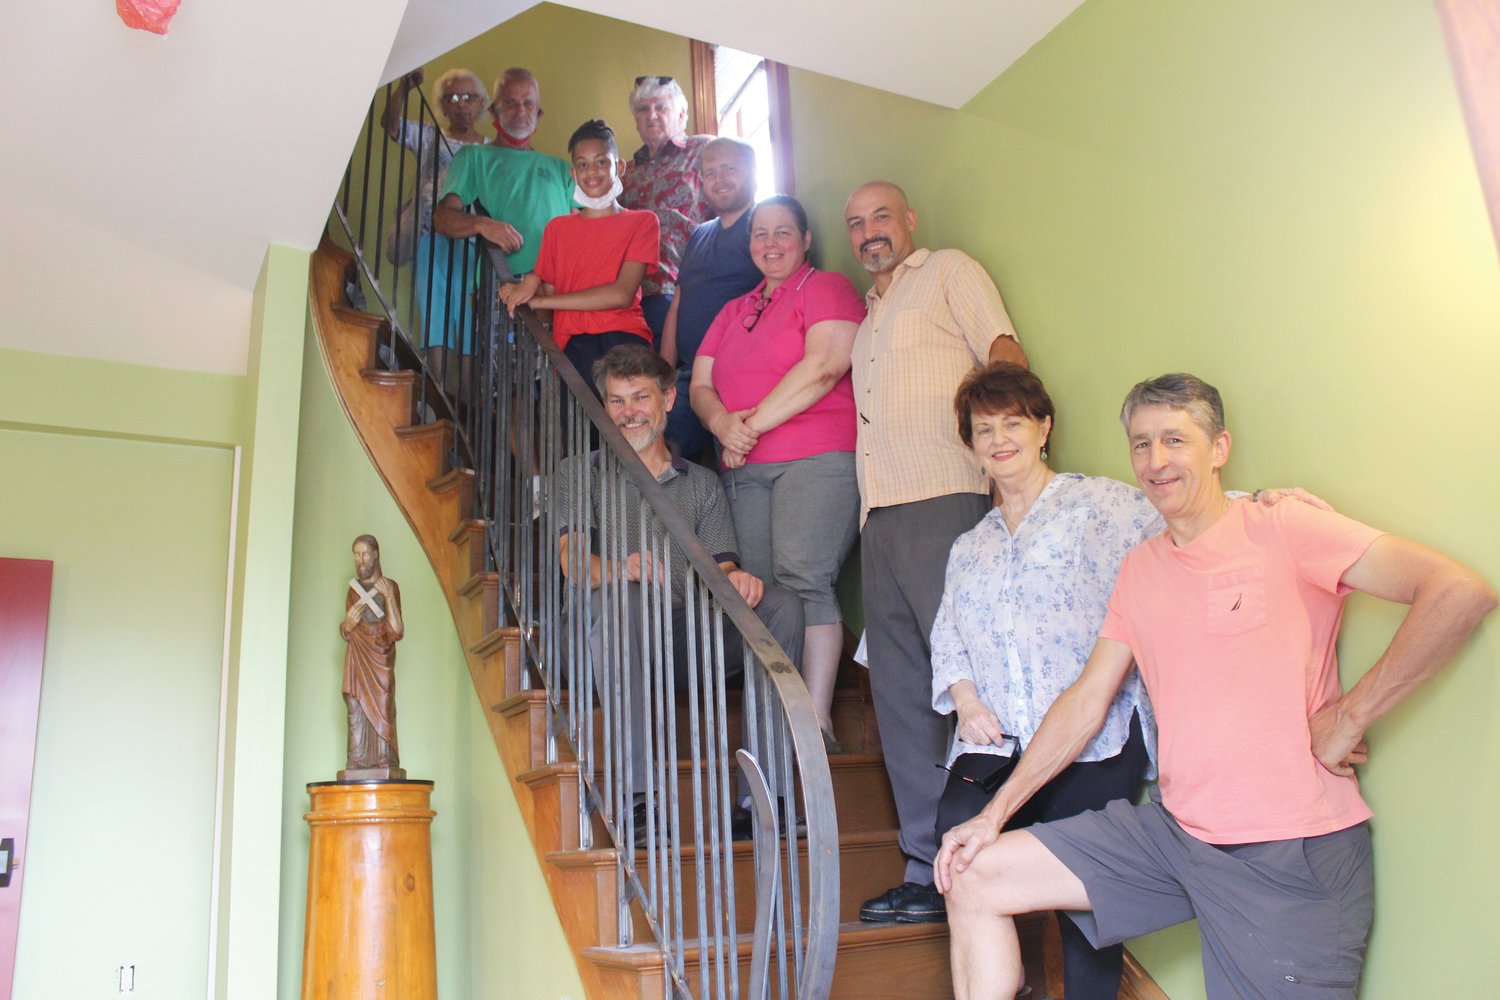 Project supporters and members of the Smith Hill community gather on the central stairs of the new St. Andrew House at the residence’s Open House on July 11.  Dr. Boyd Taylor Coolman stands third from right, with Dr. Jeremy Wilkins seated along the railing.